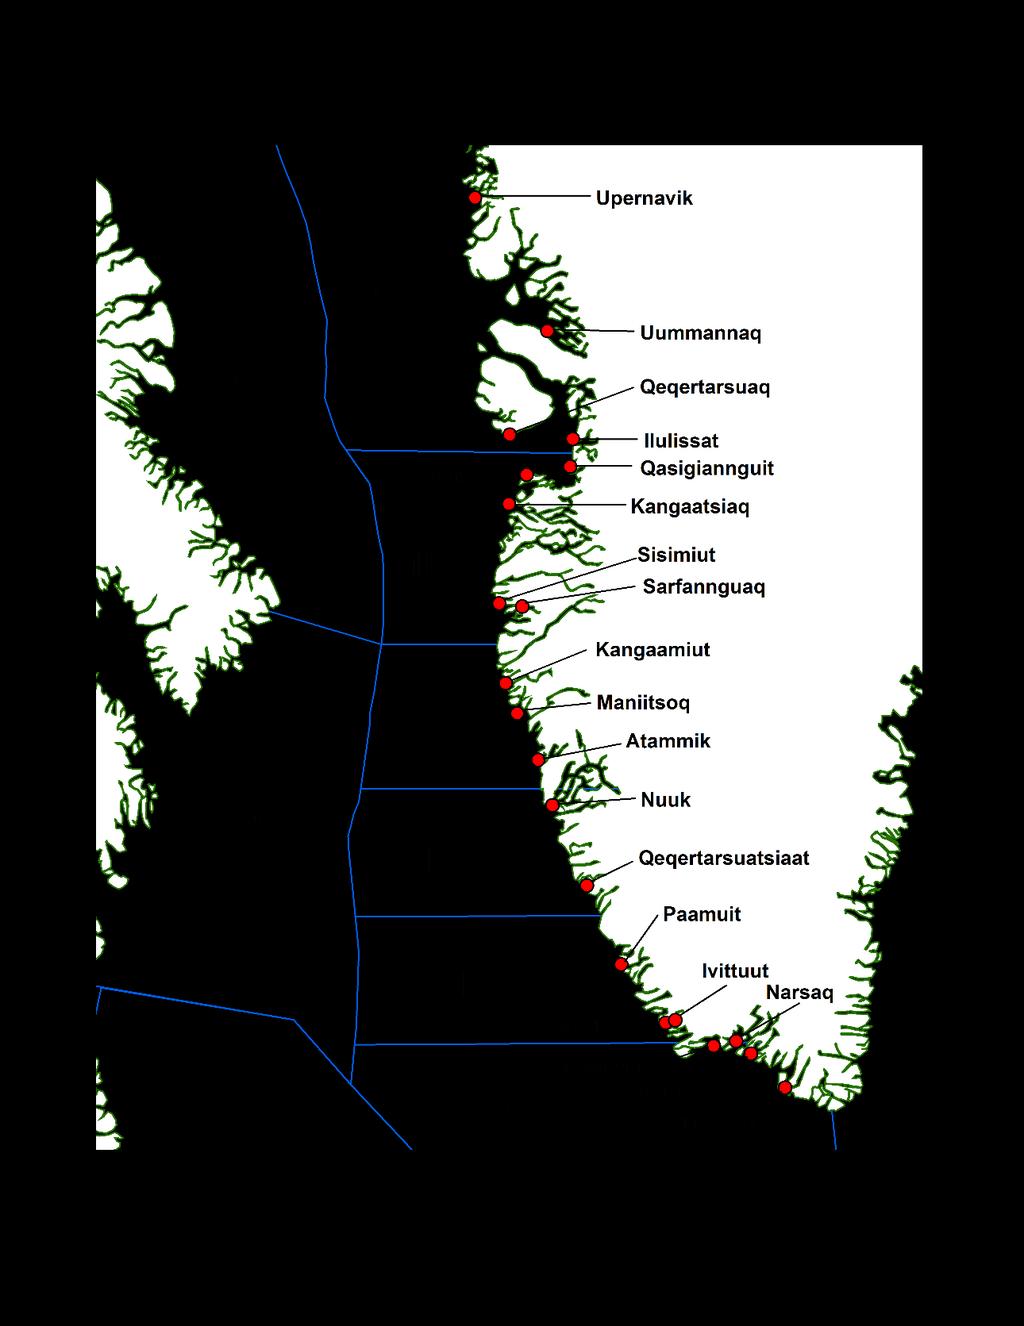 New assignment results were available for the North American contributions to the 2015 Greenland fishery. As in previous years (ICES, 2015; Bradbury et al.